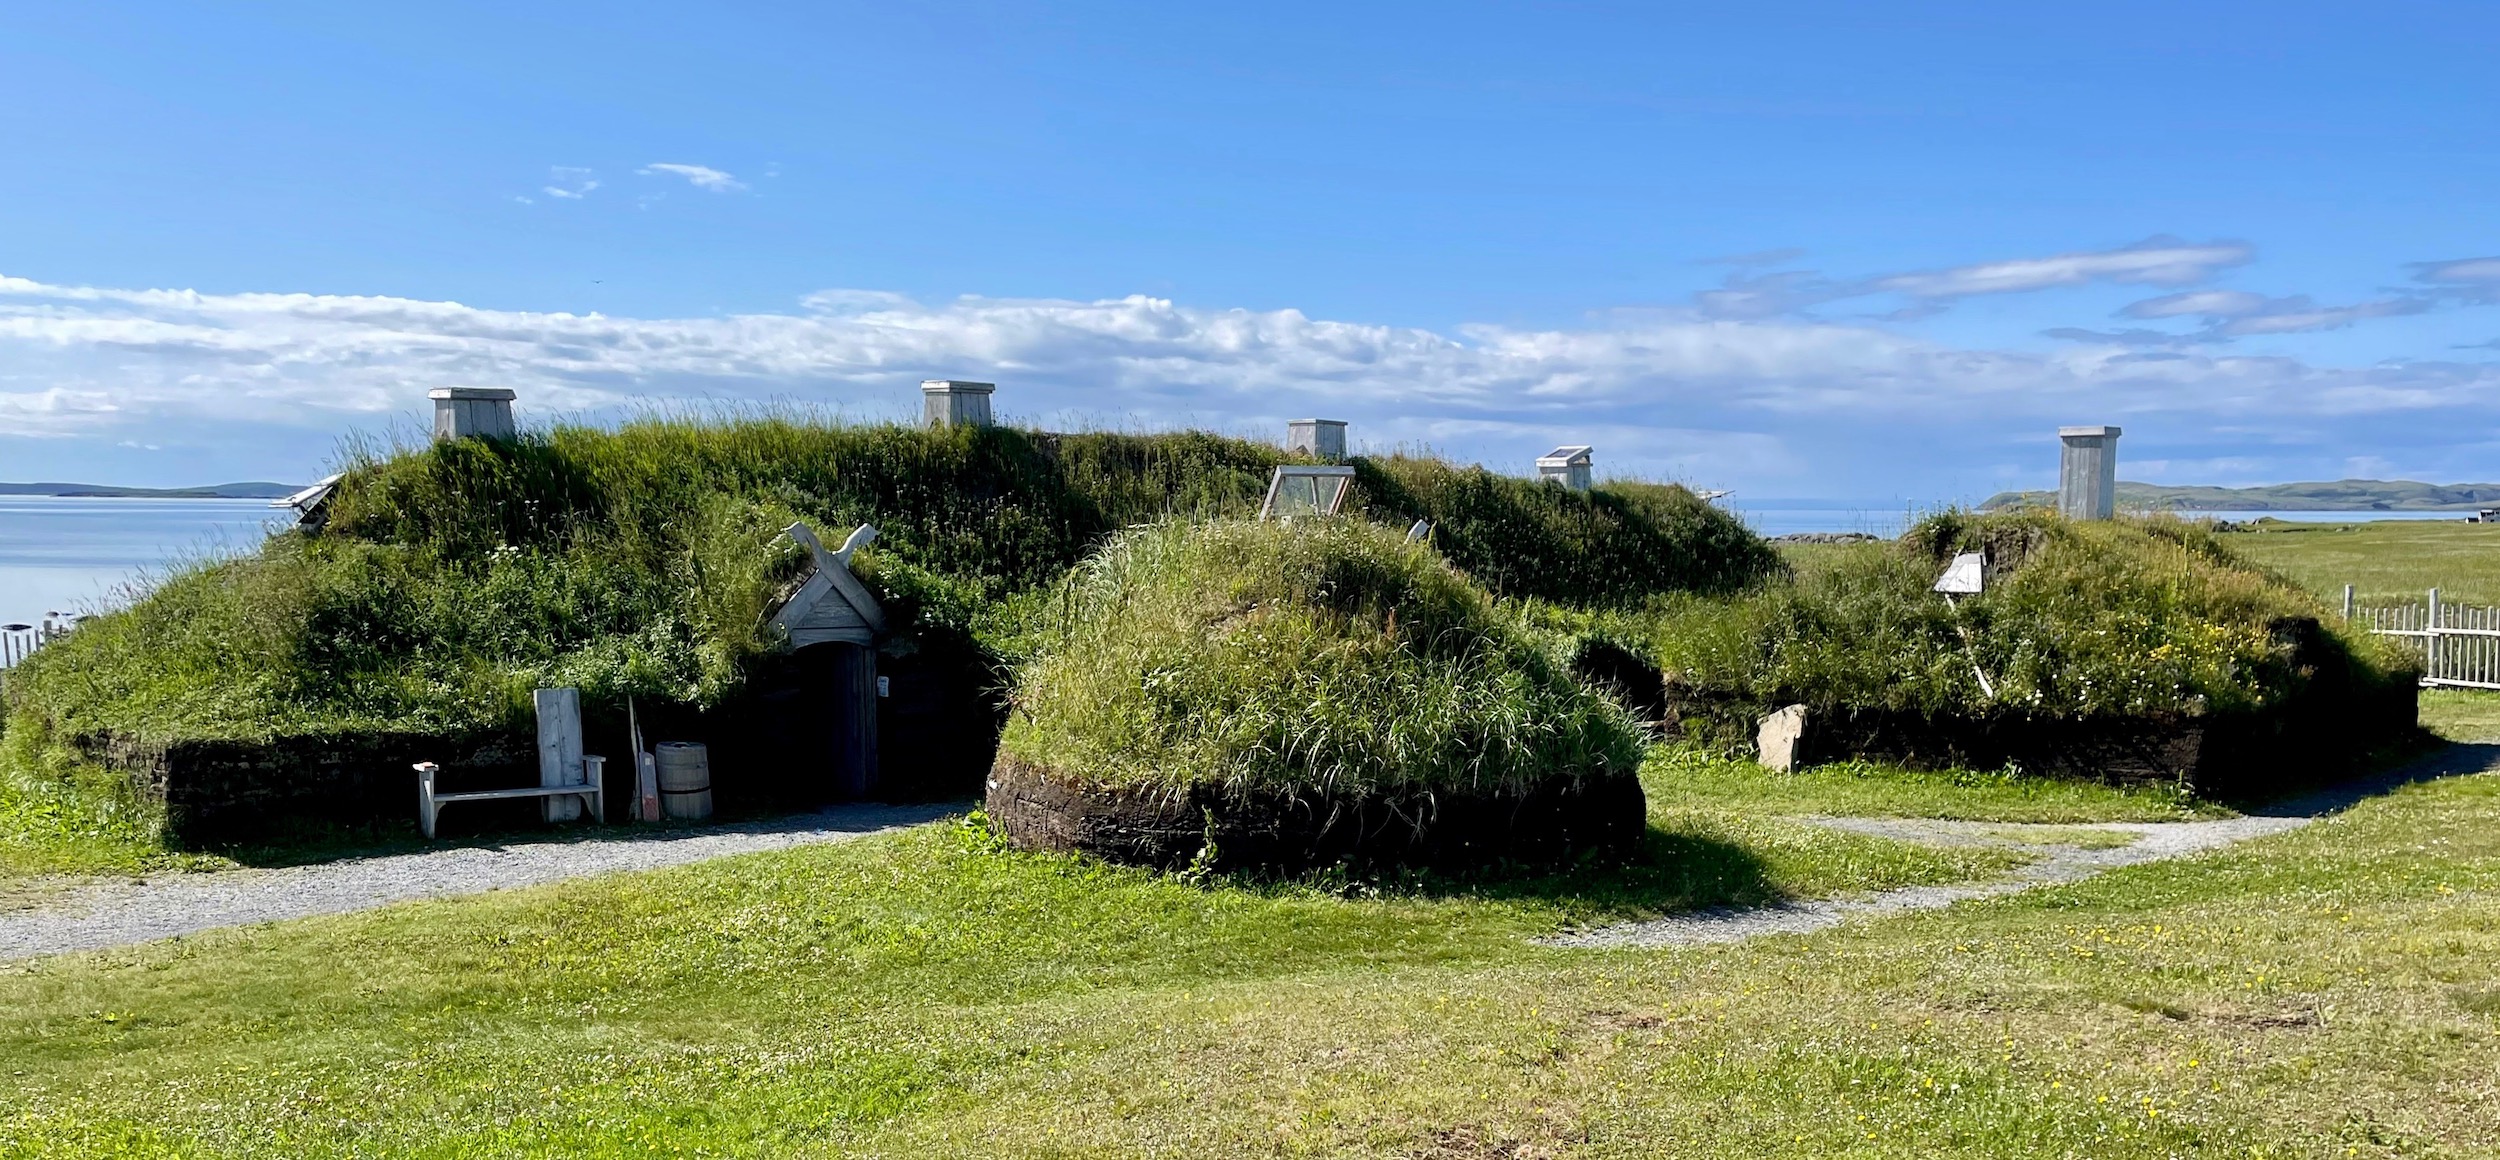 The Recreated Site, L'Anse aux Meadows